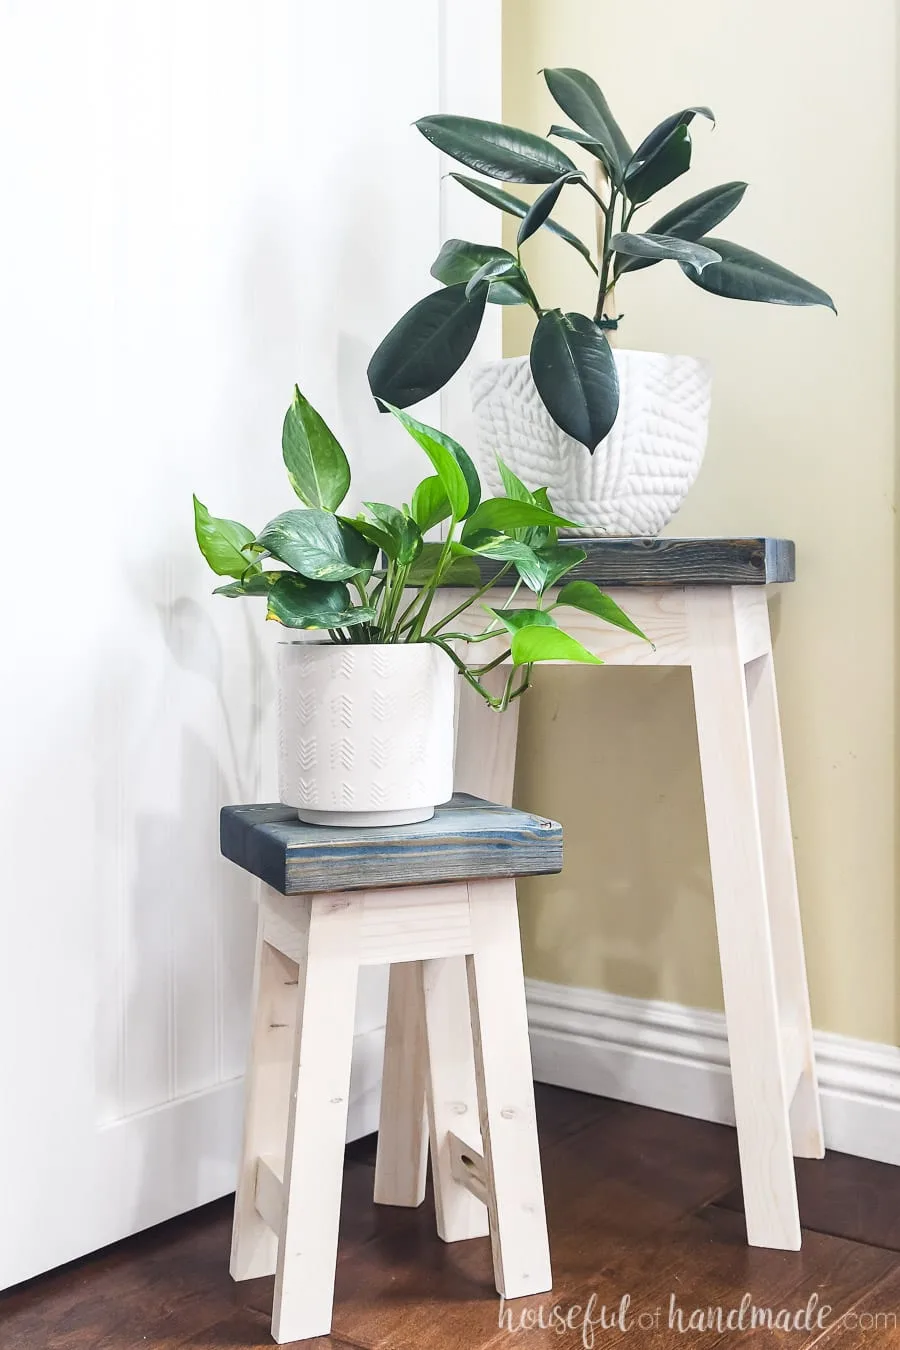 DIY nesting plant stands holding a rubber plant and pothos plant in white pots. 